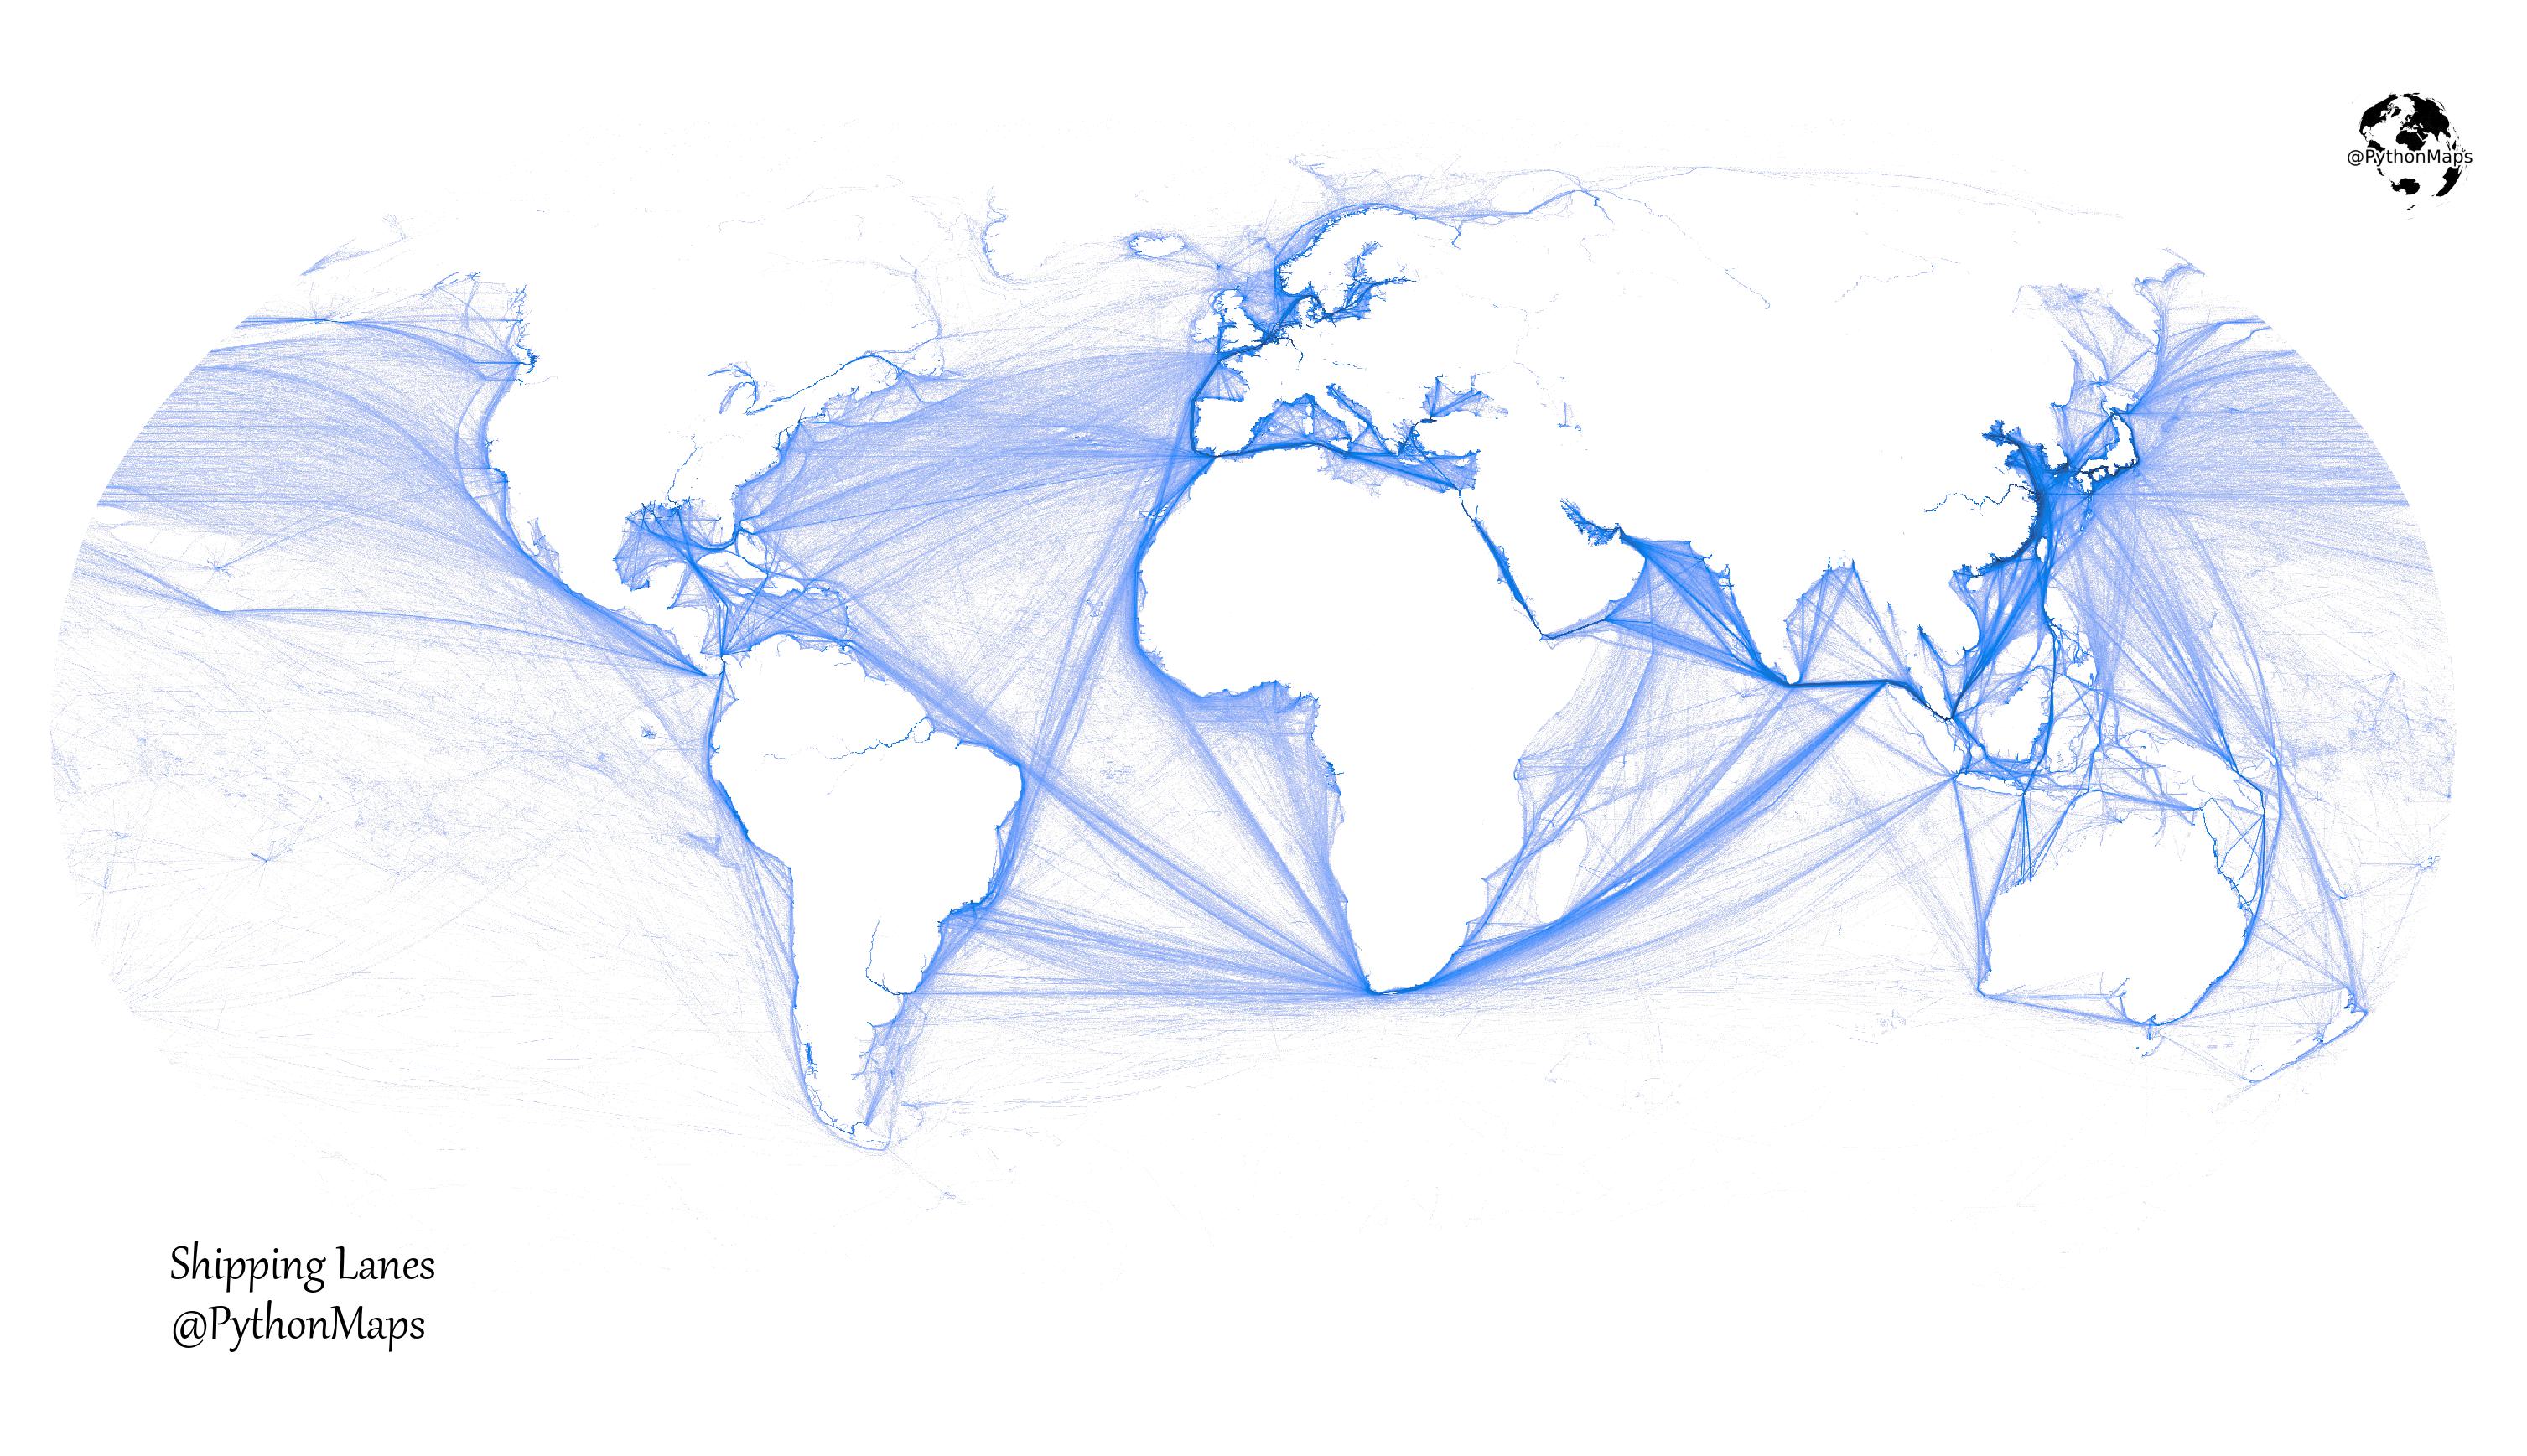 The World's Shipping Lanes